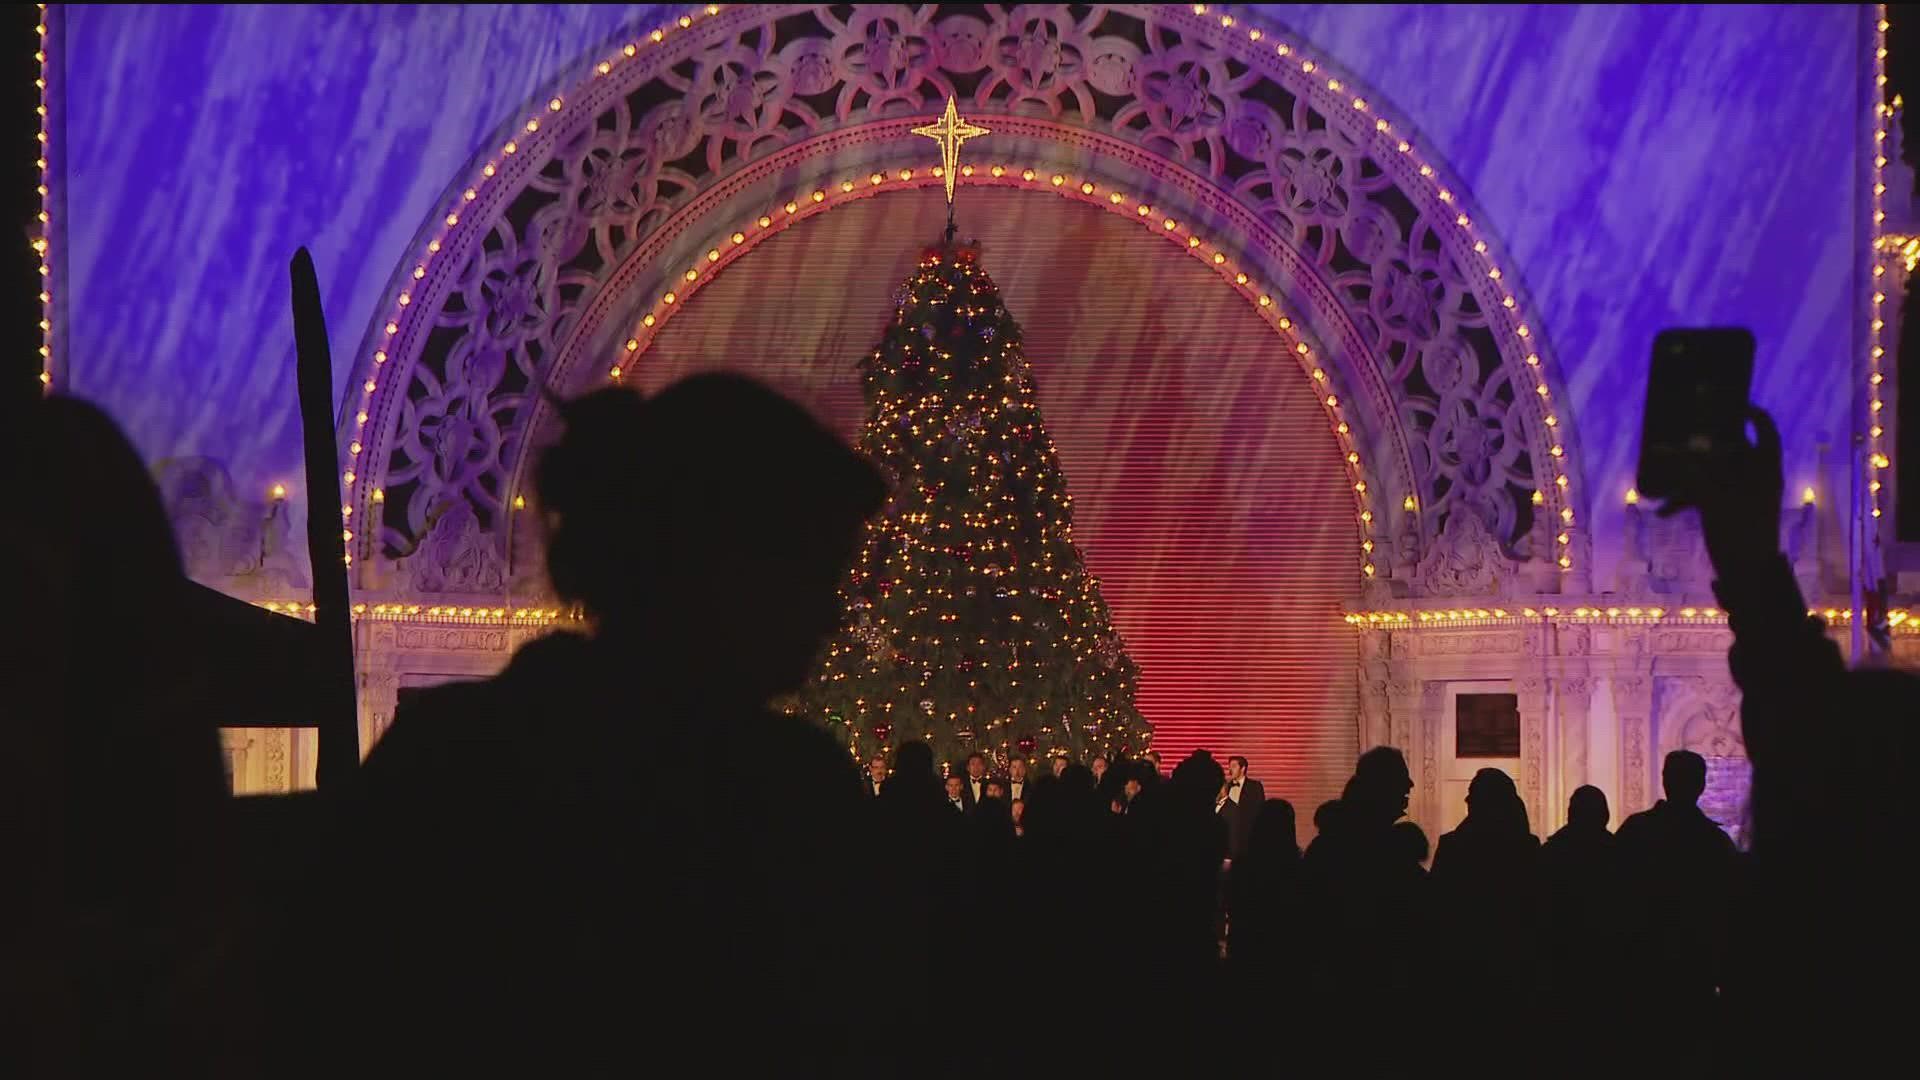 San Diegans are stoked about December Nights' return after the COVID-19 pandemic.